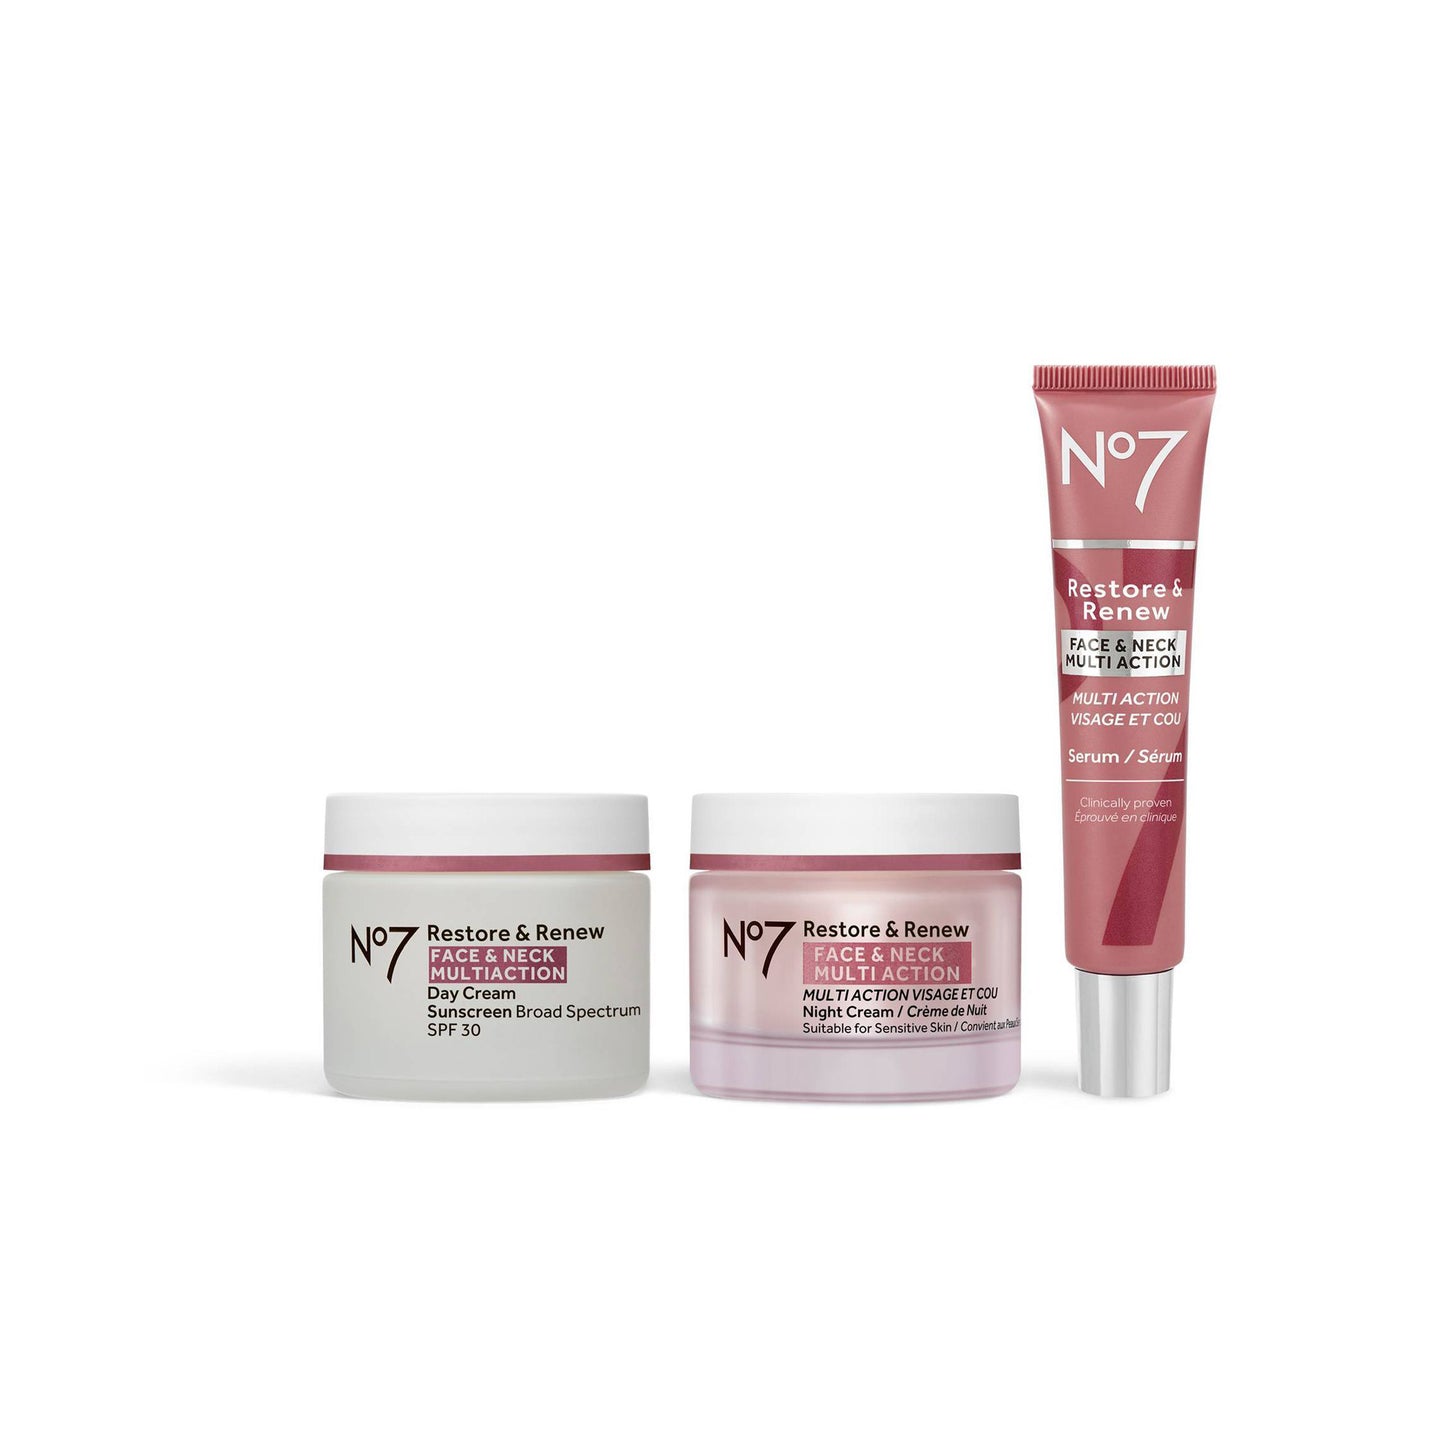 No7 Restore Renew Face Neck Multi Action Skincare System